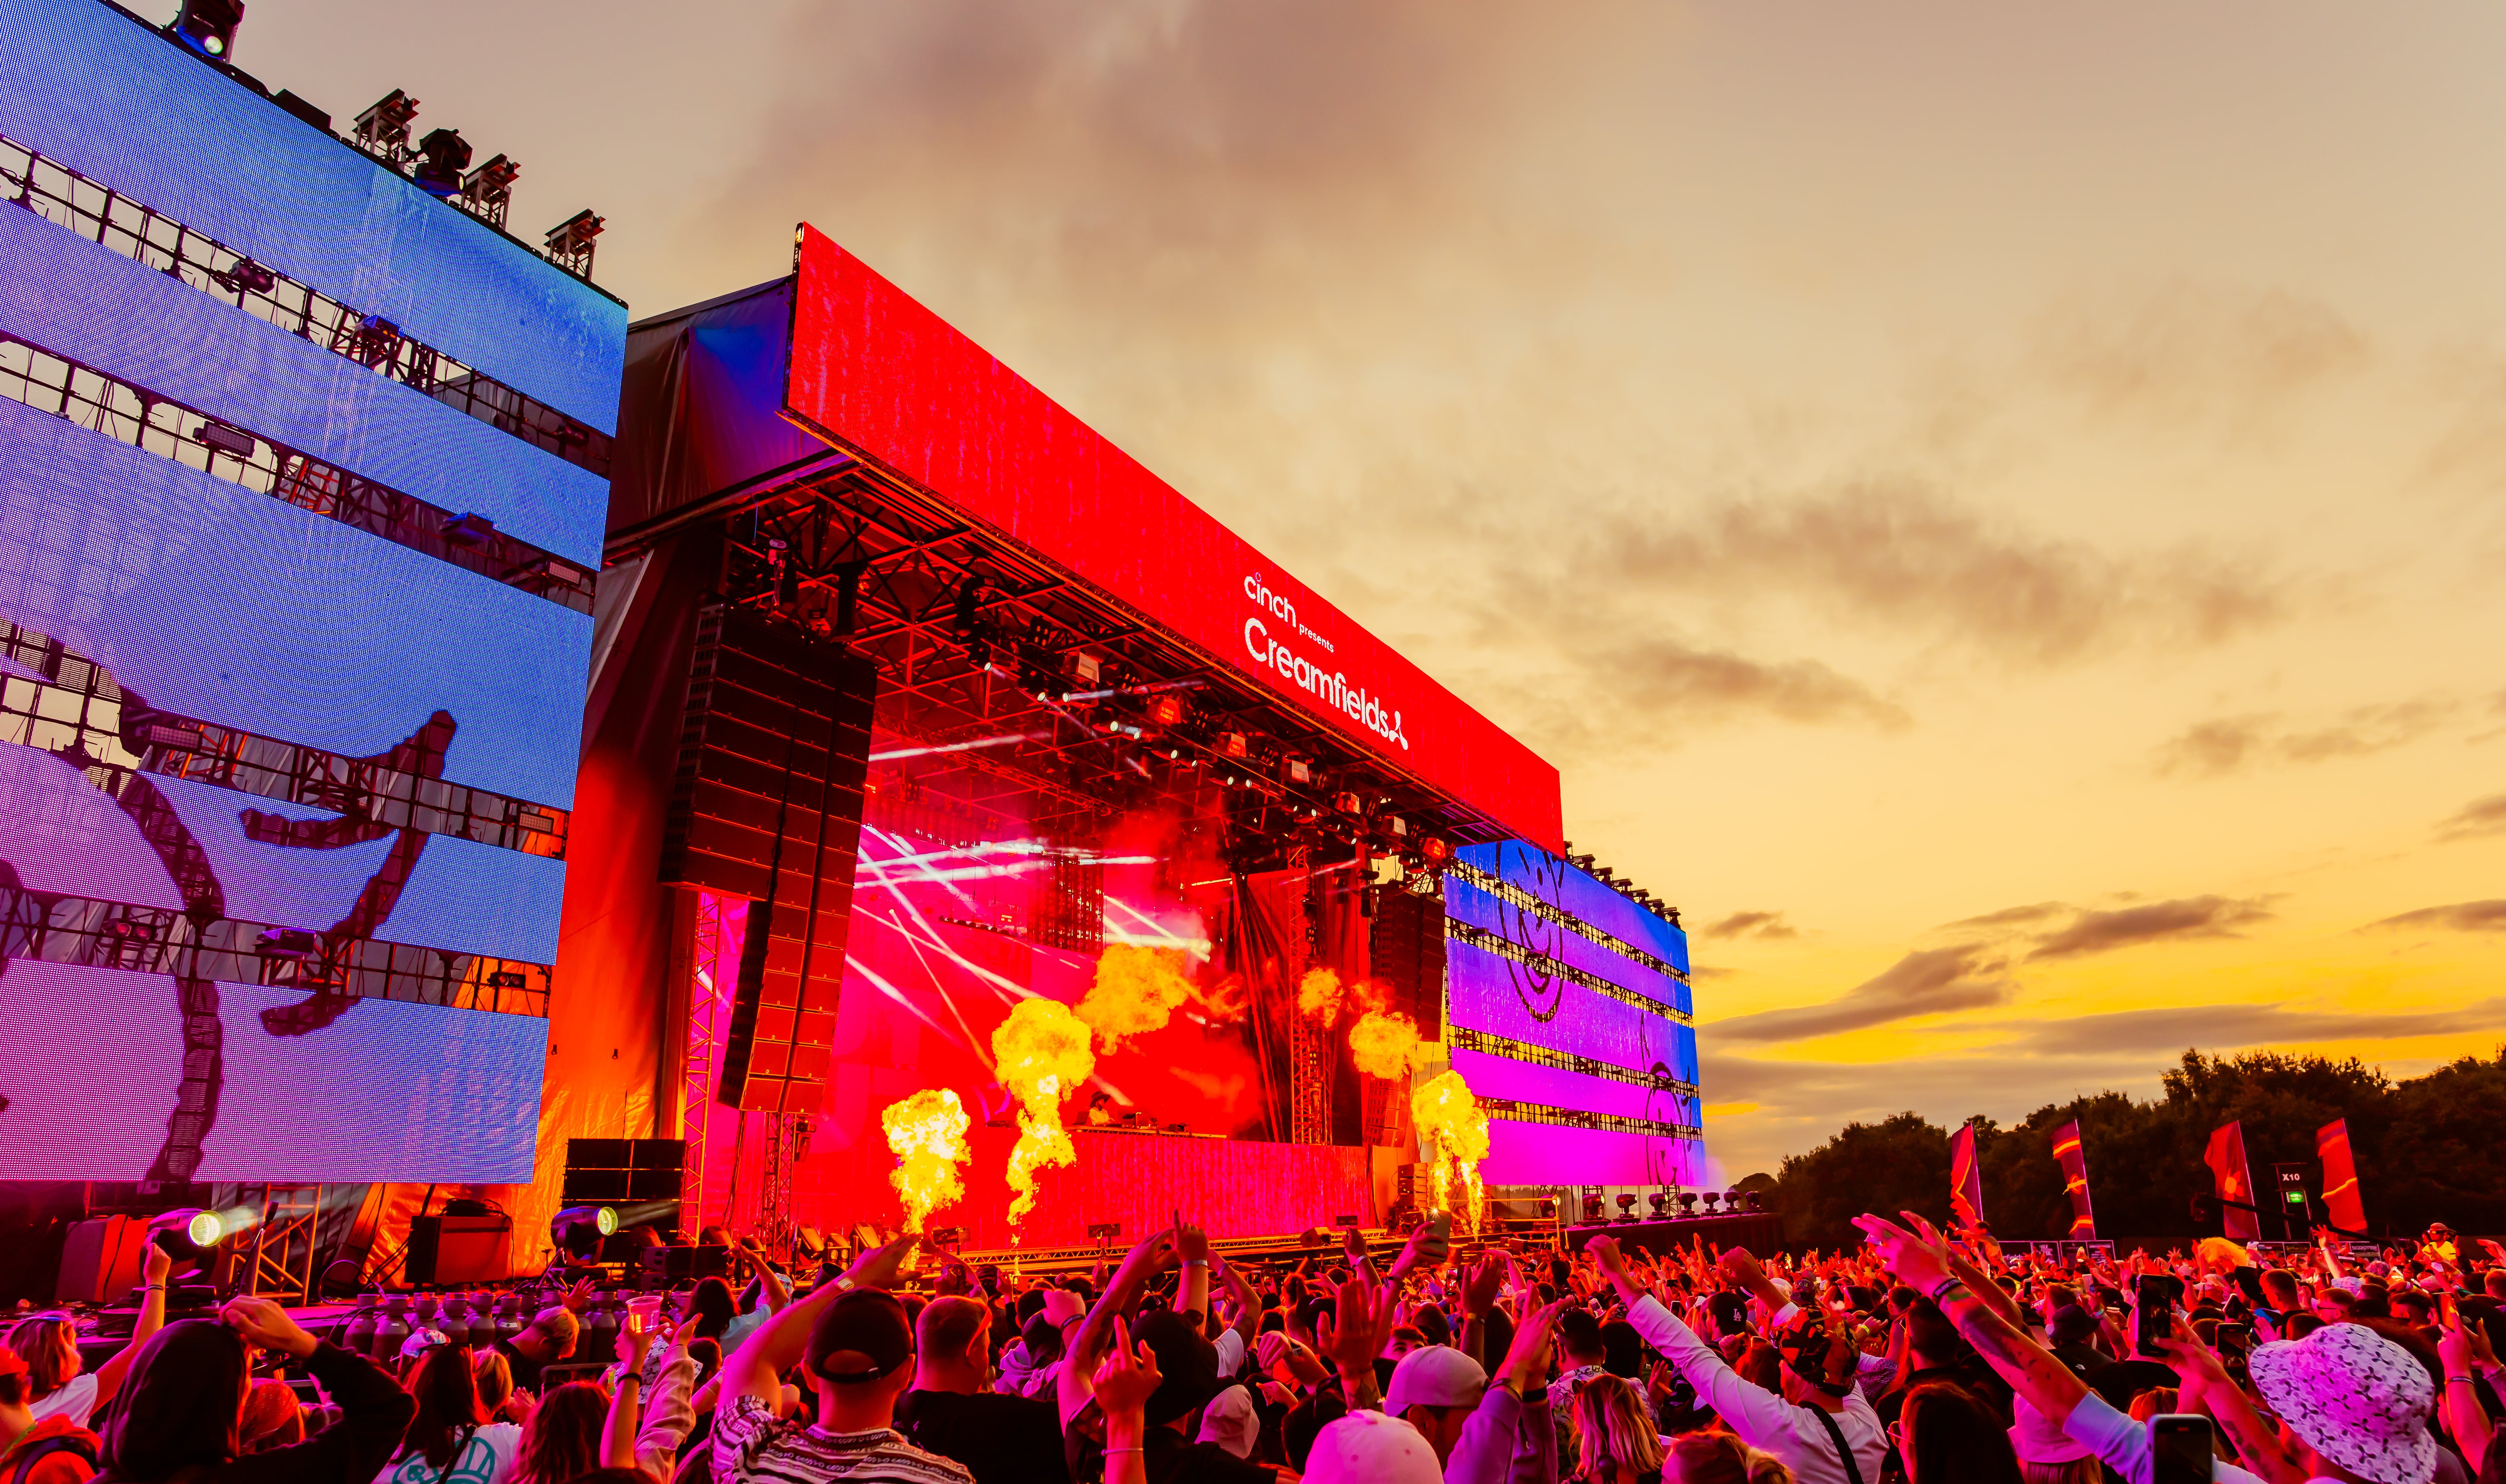 The annual Creamfields festival is the biggest event in Cheshire